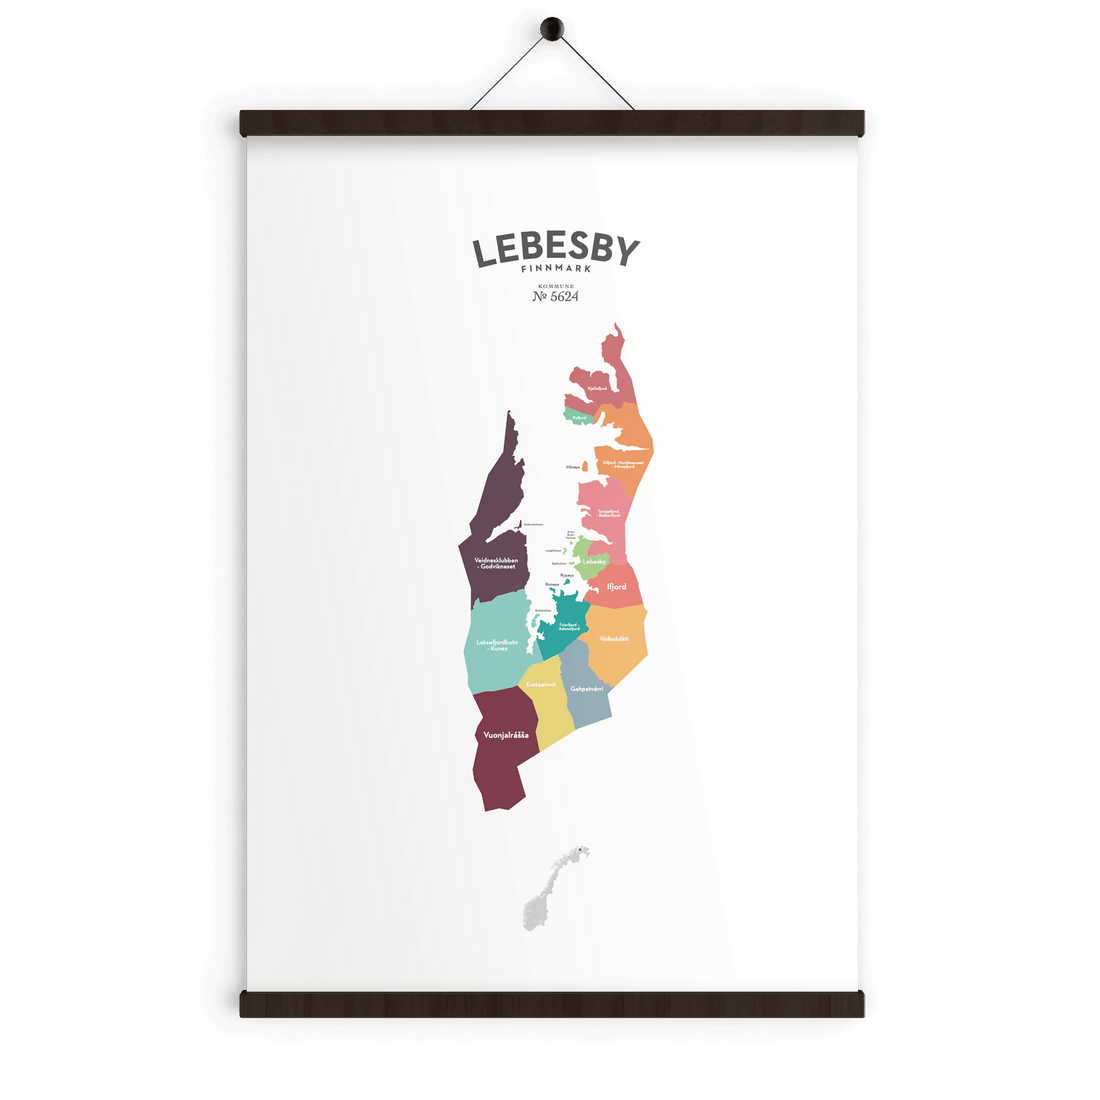 Lebesby